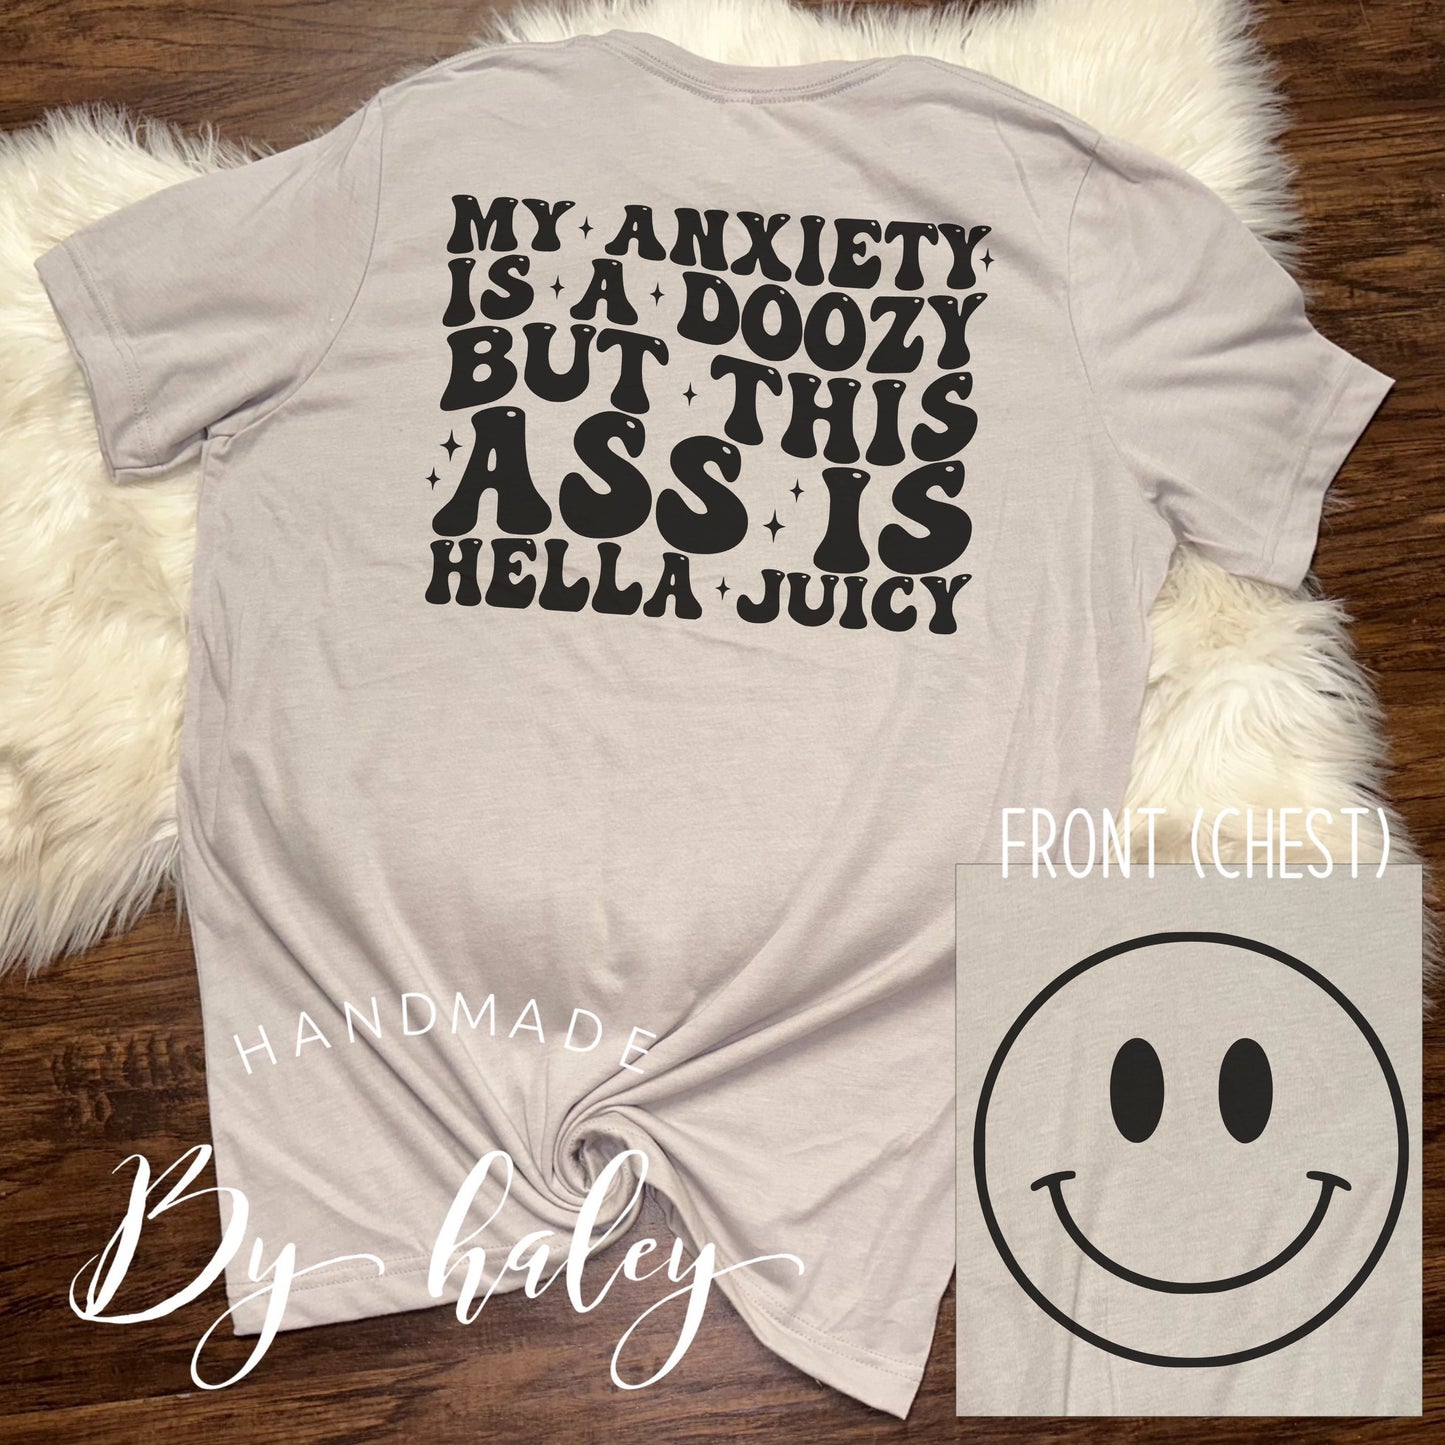 My Anxiety Is a Doozy T-Shirt